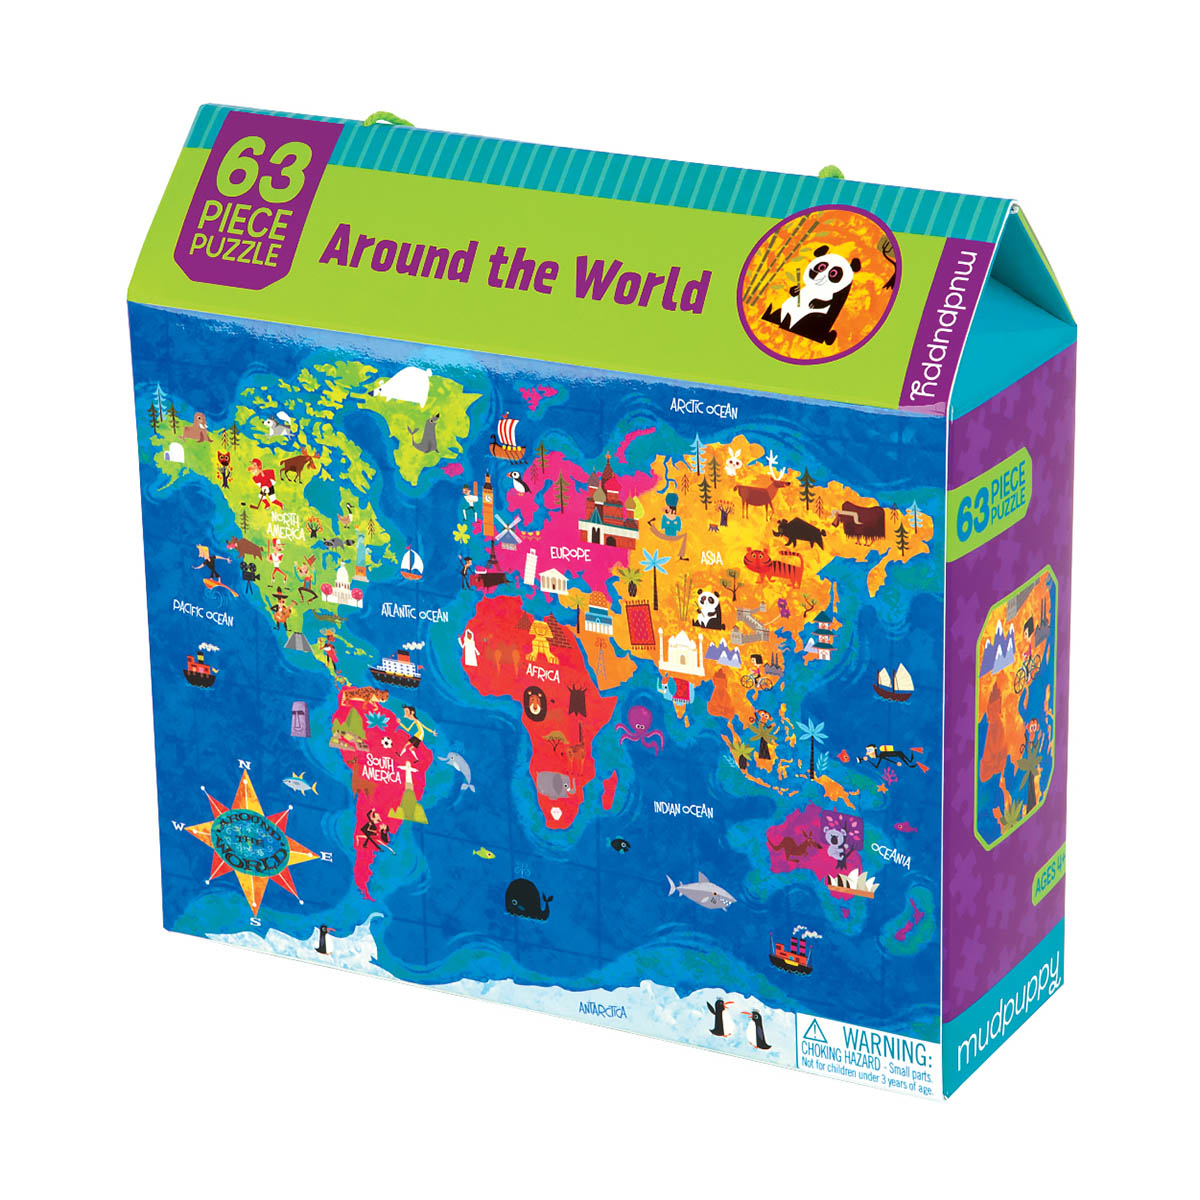 Around the World 63 Piece Puzzle - Scratch and Dent Educational Jigsaw Puzzle